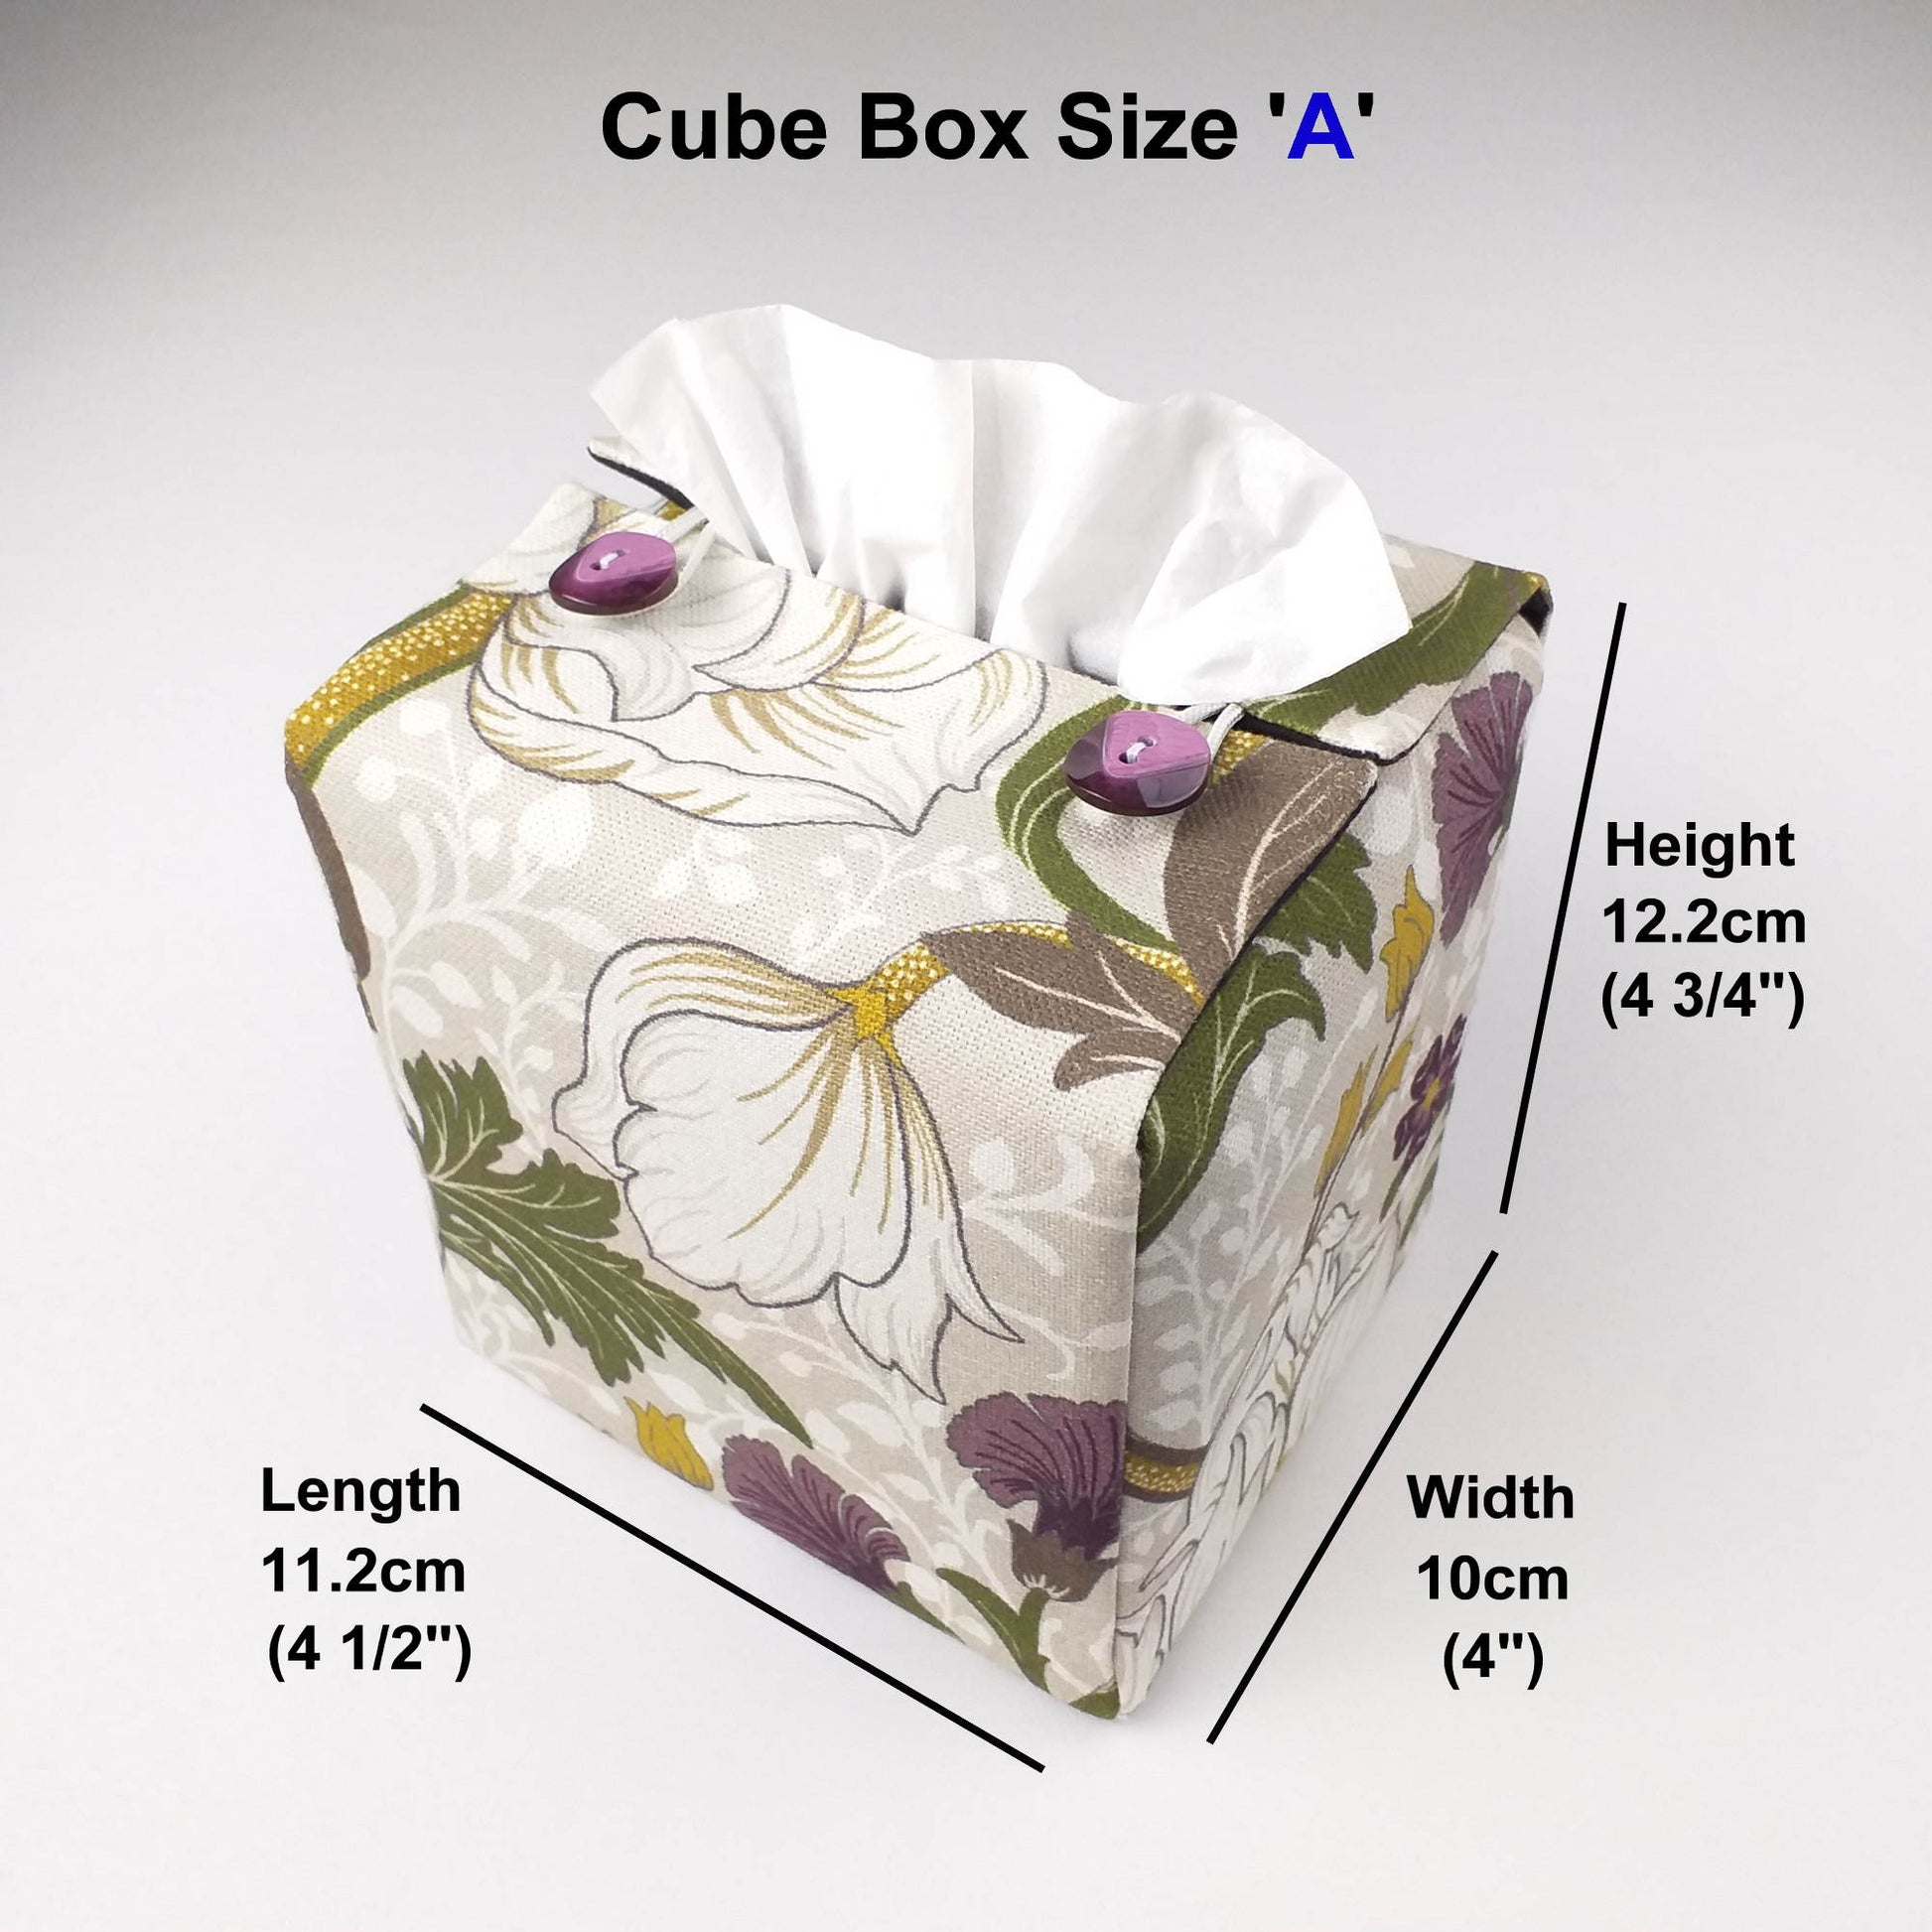 Square tissue box cover with white magnolia flowers design with green, yellow, and purple accents